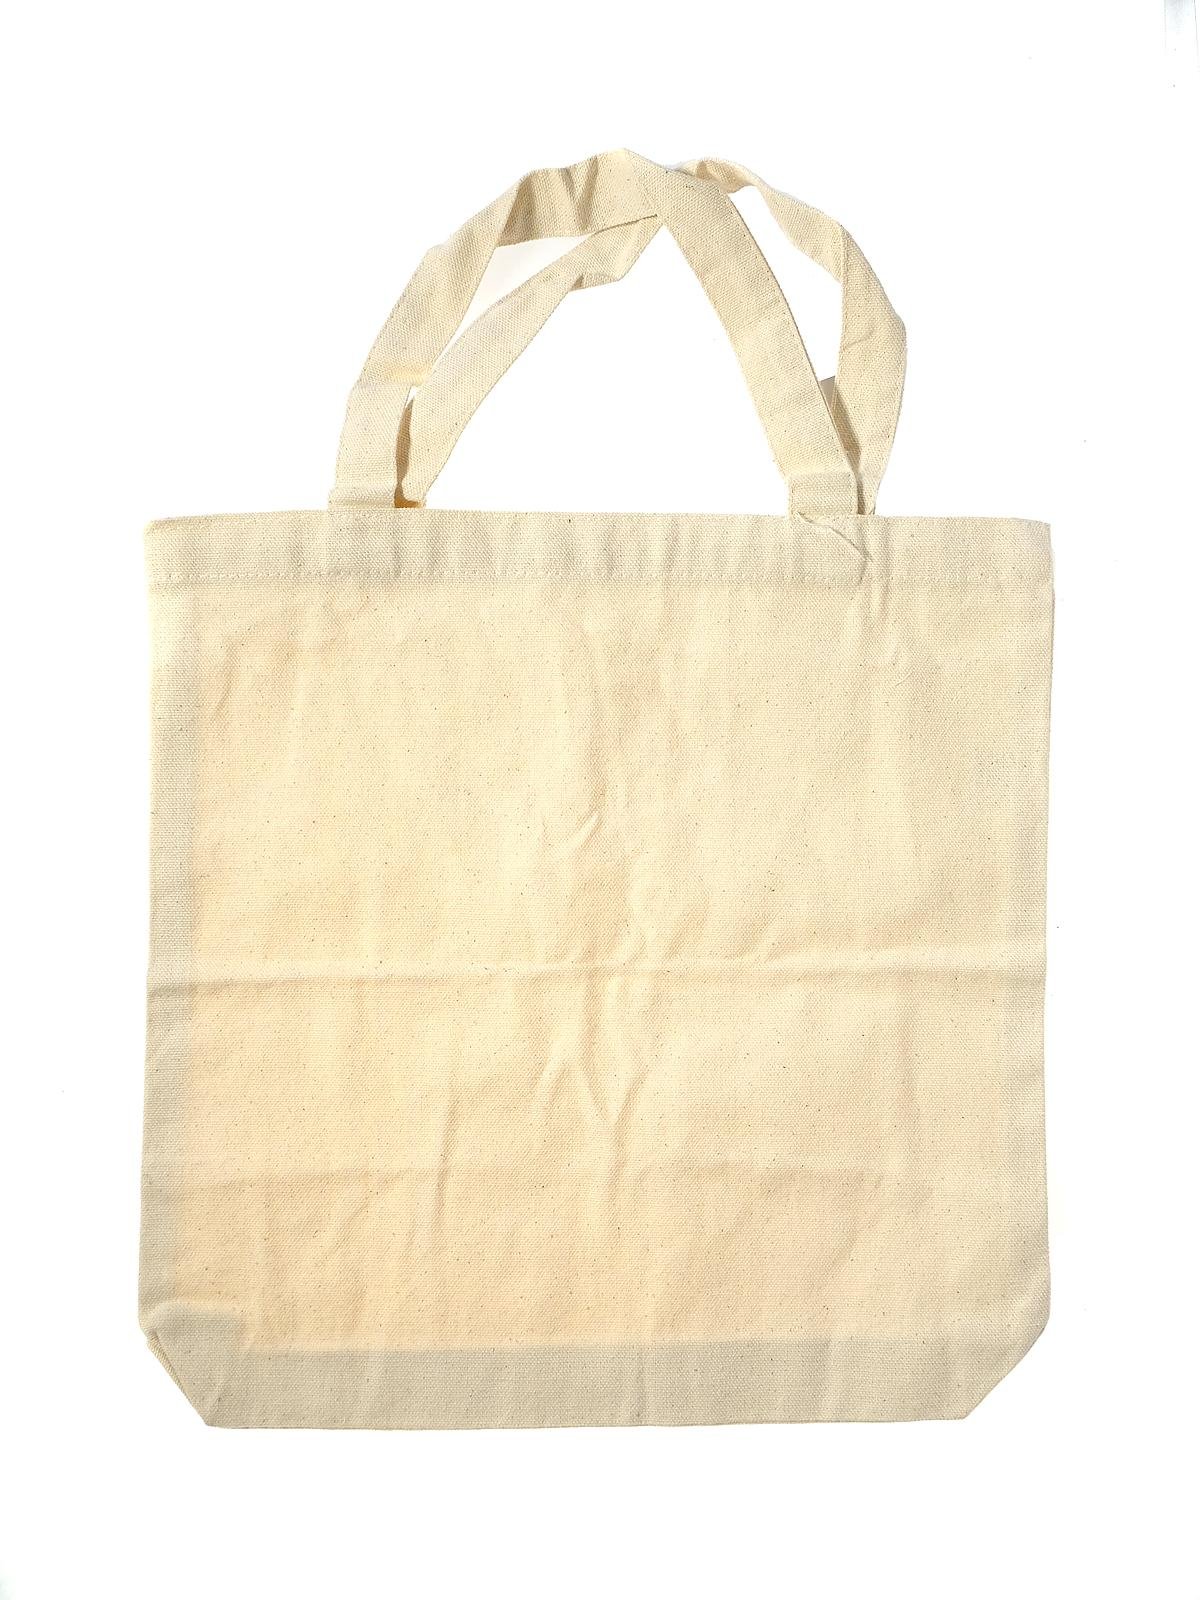 Small Cotton Carry Bags - Design & Print Small Cotton Tote Bags Online -  Printo.in